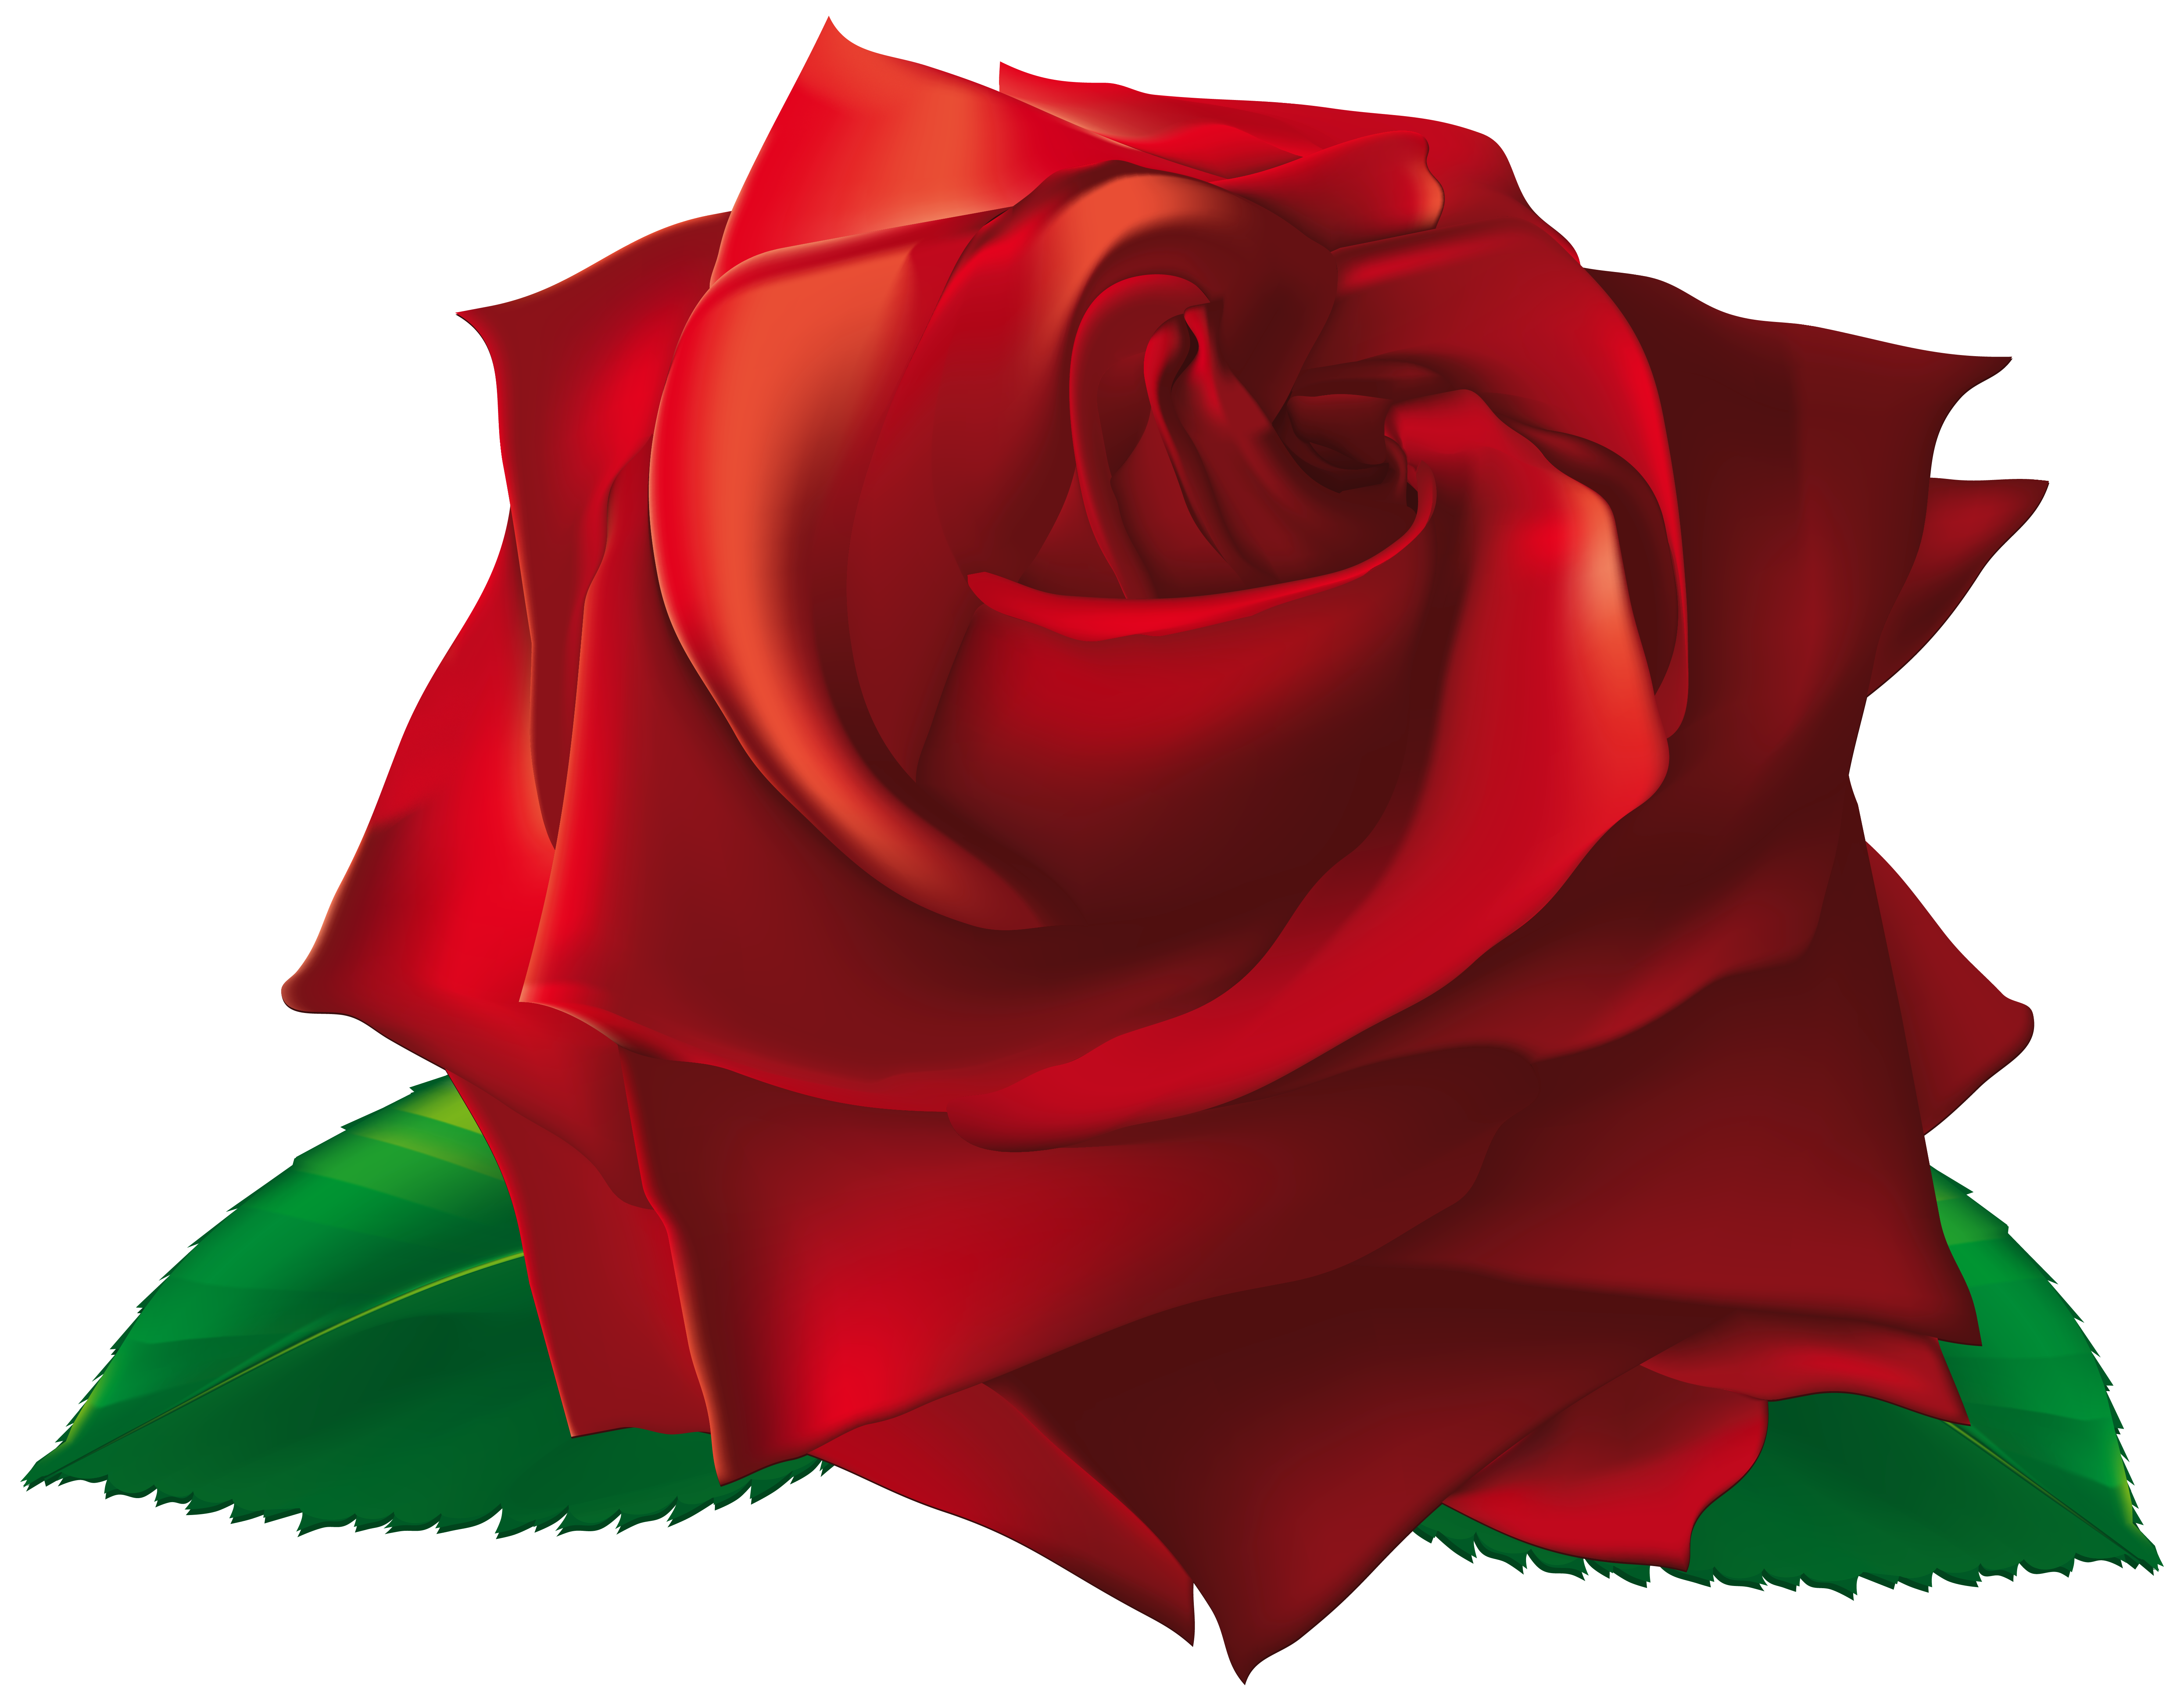 Red Single Rose PNG Clipart Image 